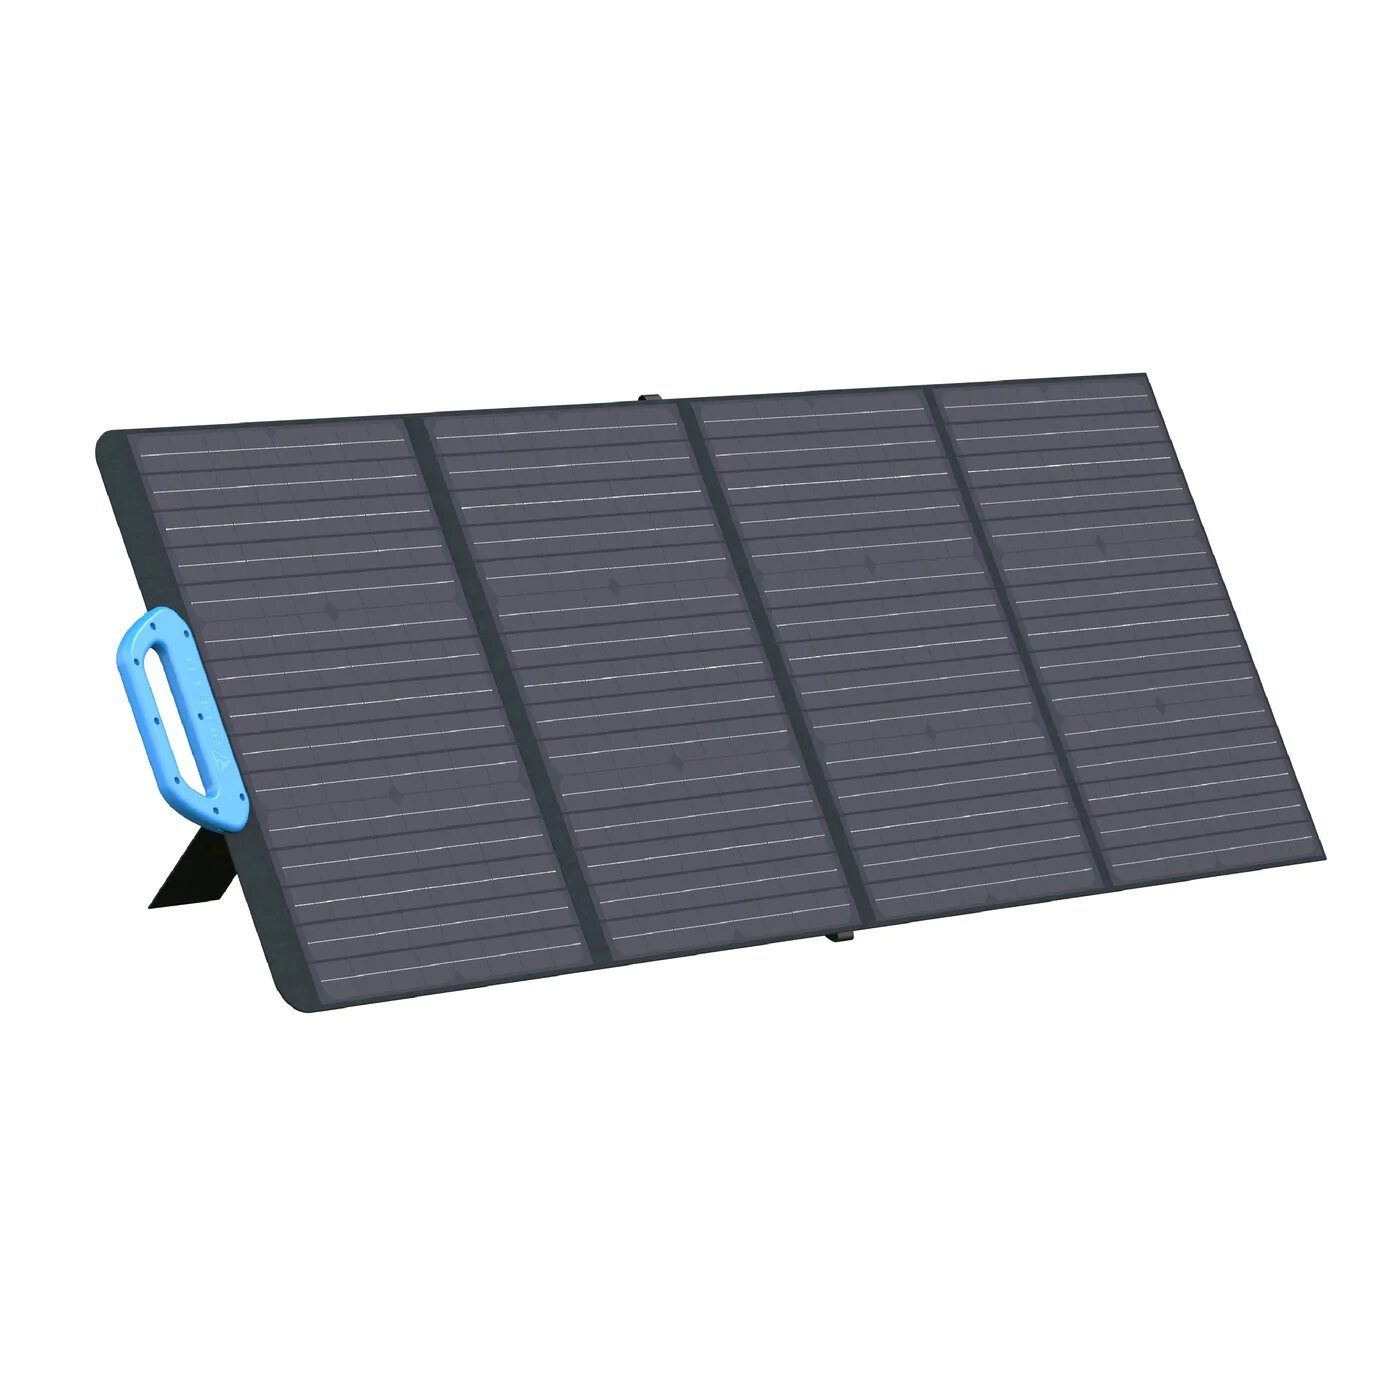 Image of [EU Direct] BLUETTI PV200 200W Solar Panel Portable Foldable IP54 Waterproof High Conversion Efficiency Solar Charger Wi